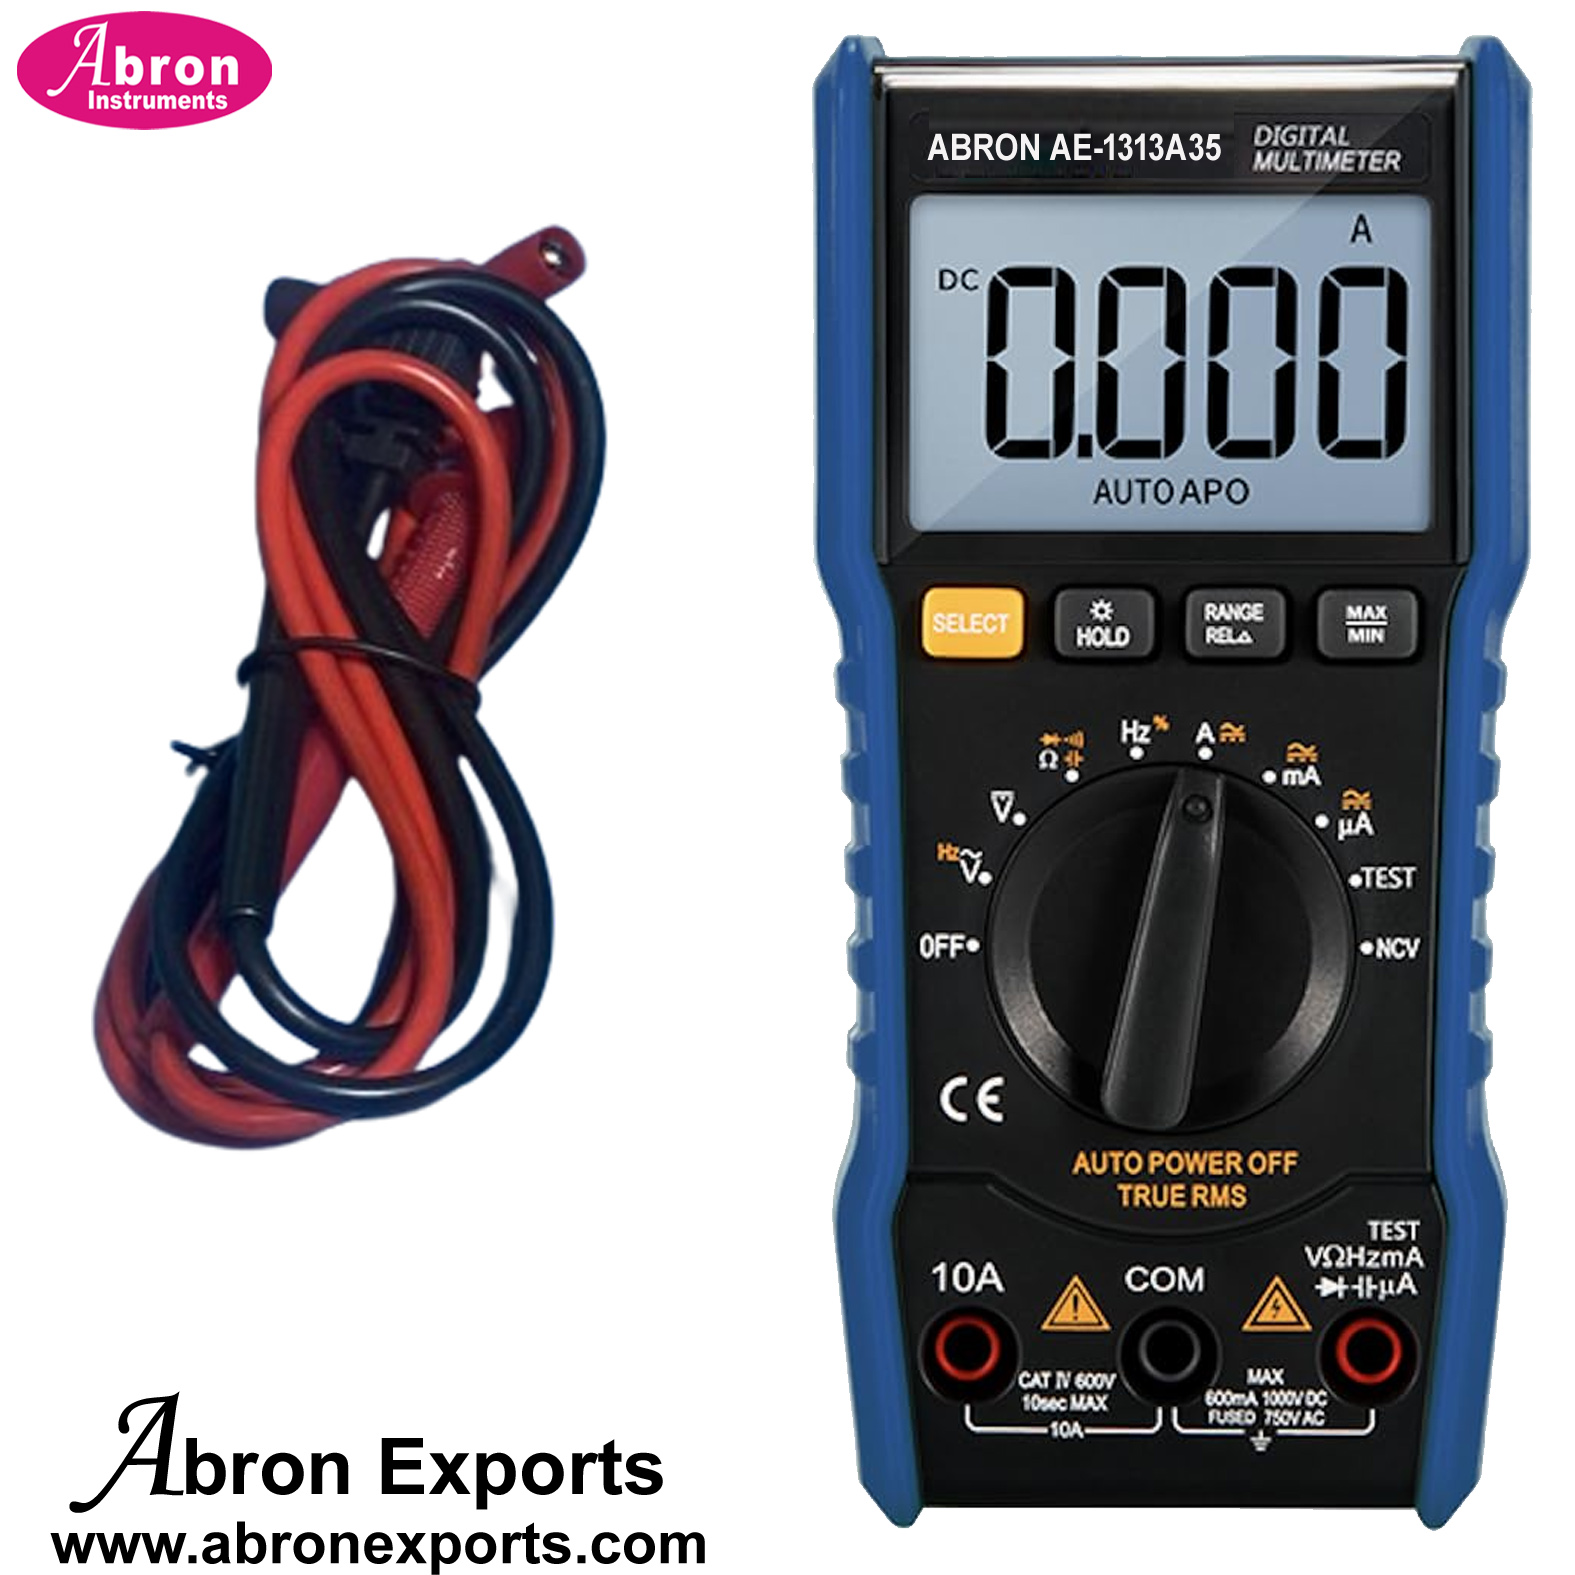 Multimeter 3.5 Digital Auto Range T-RMS 6000 Count 1000VDC 750VAC check Current Resistance Capacitance Frequency Hz Diode Continuity Data Hold APO Backlight Abron AE-1313AC 